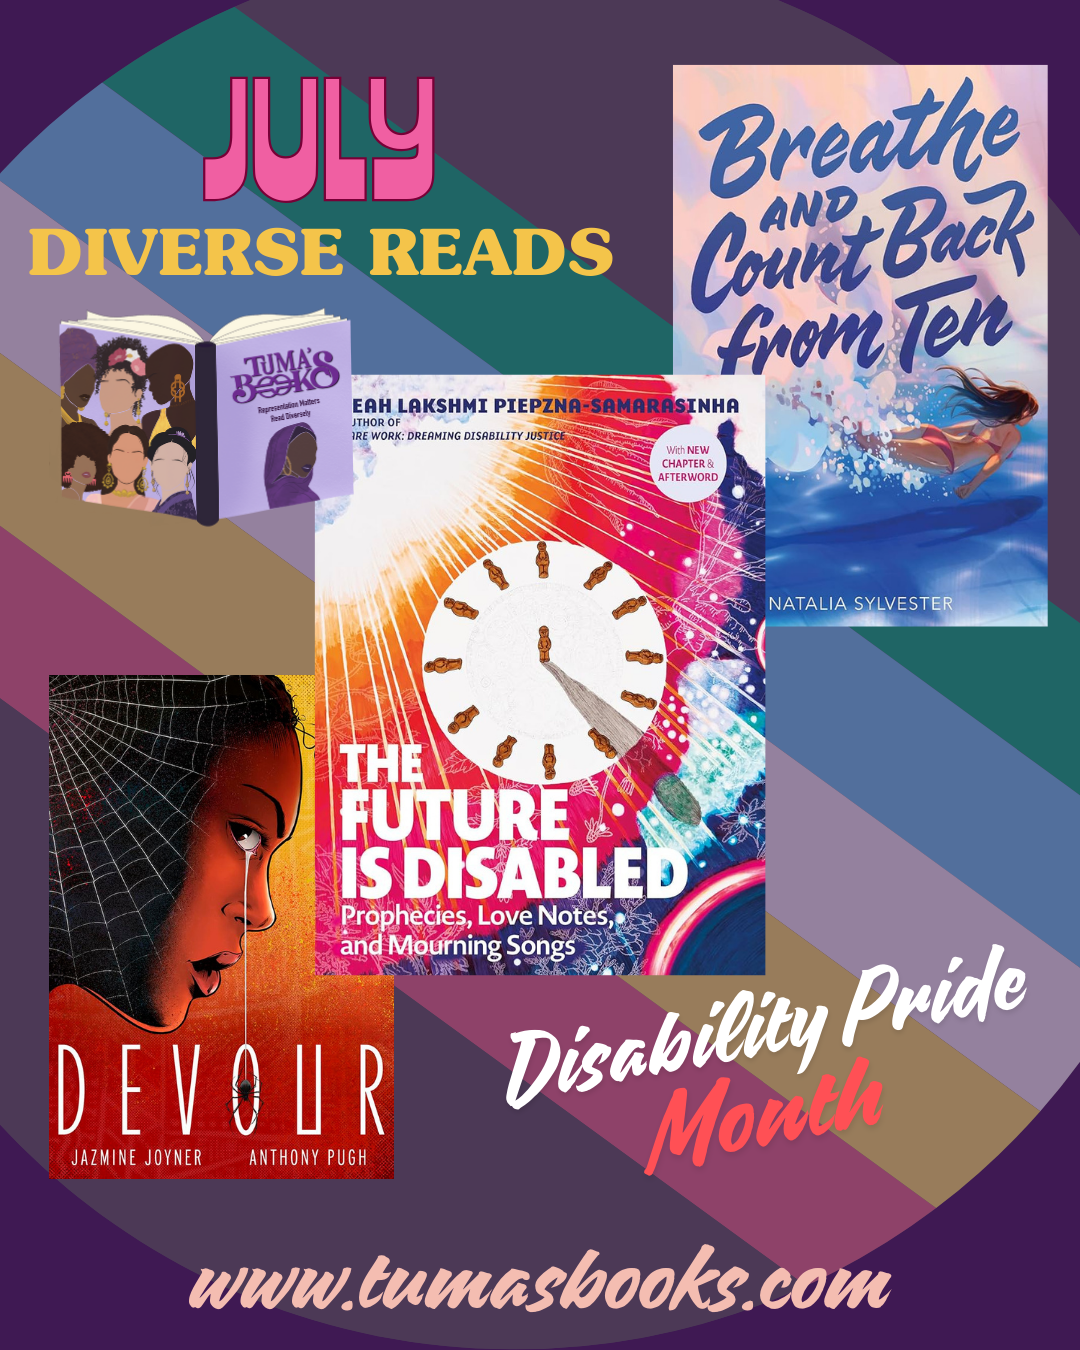 Monthly Diverse Reads -  One Time or Subscription